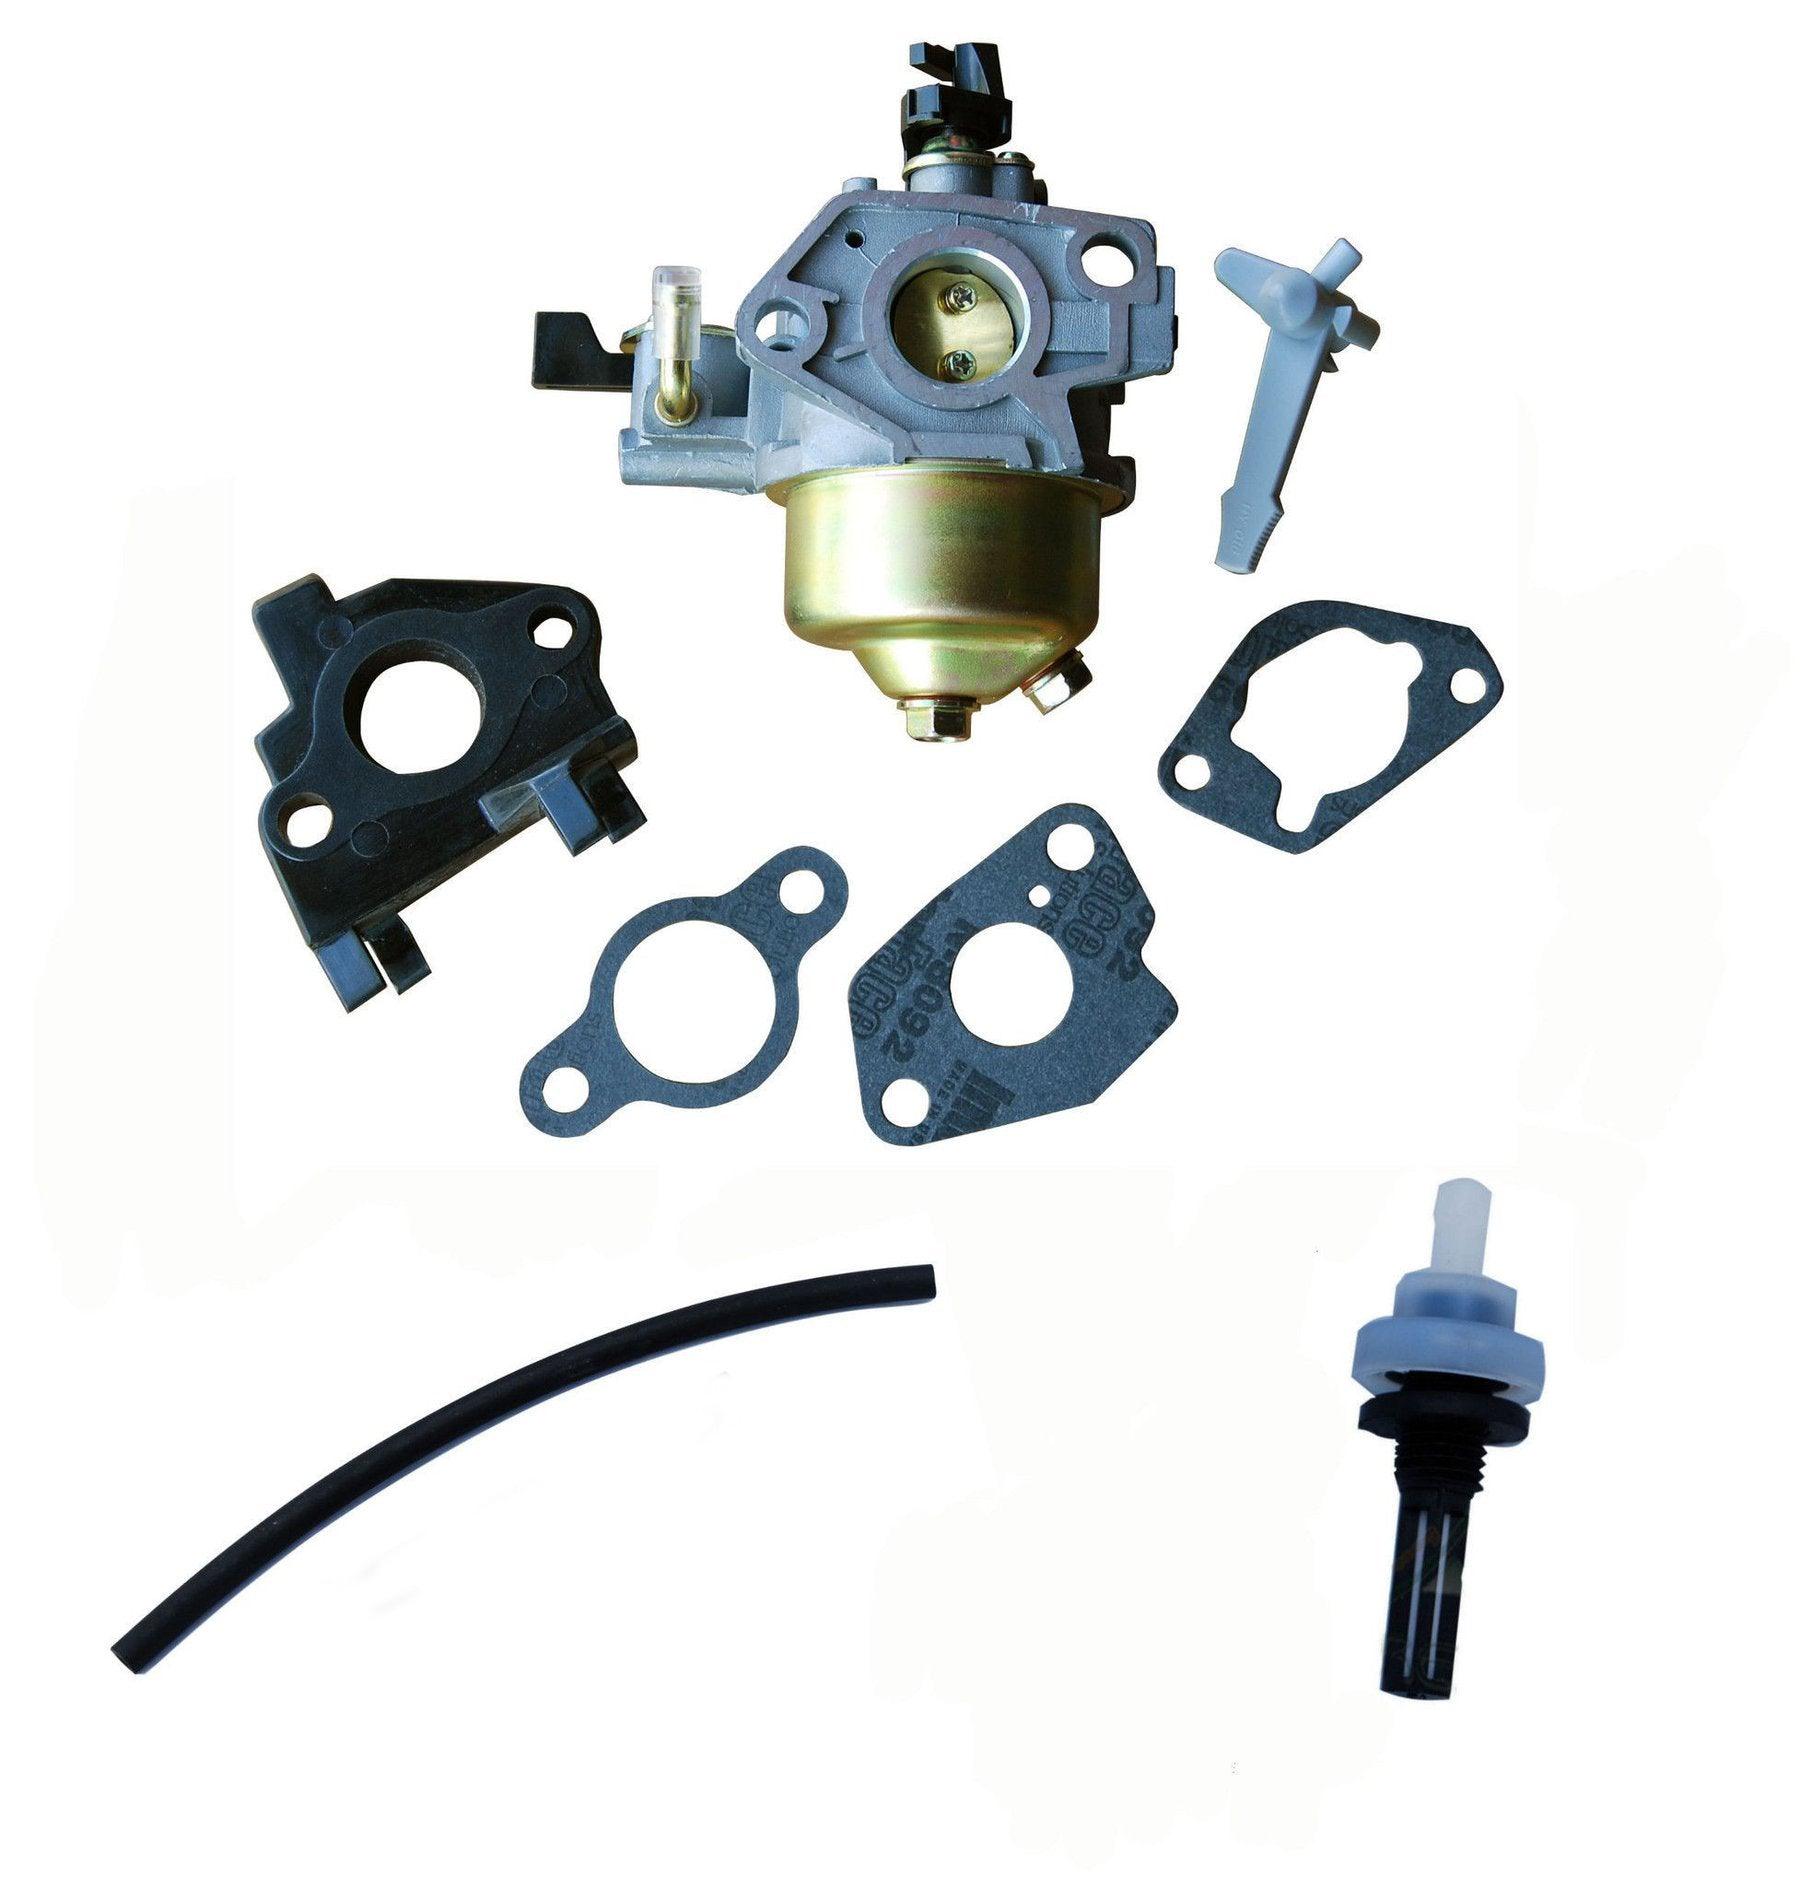 Carburetor Kit fits Harbor Freight Predator 420cc 13HP with spacer, gaskets, fuel gas filter